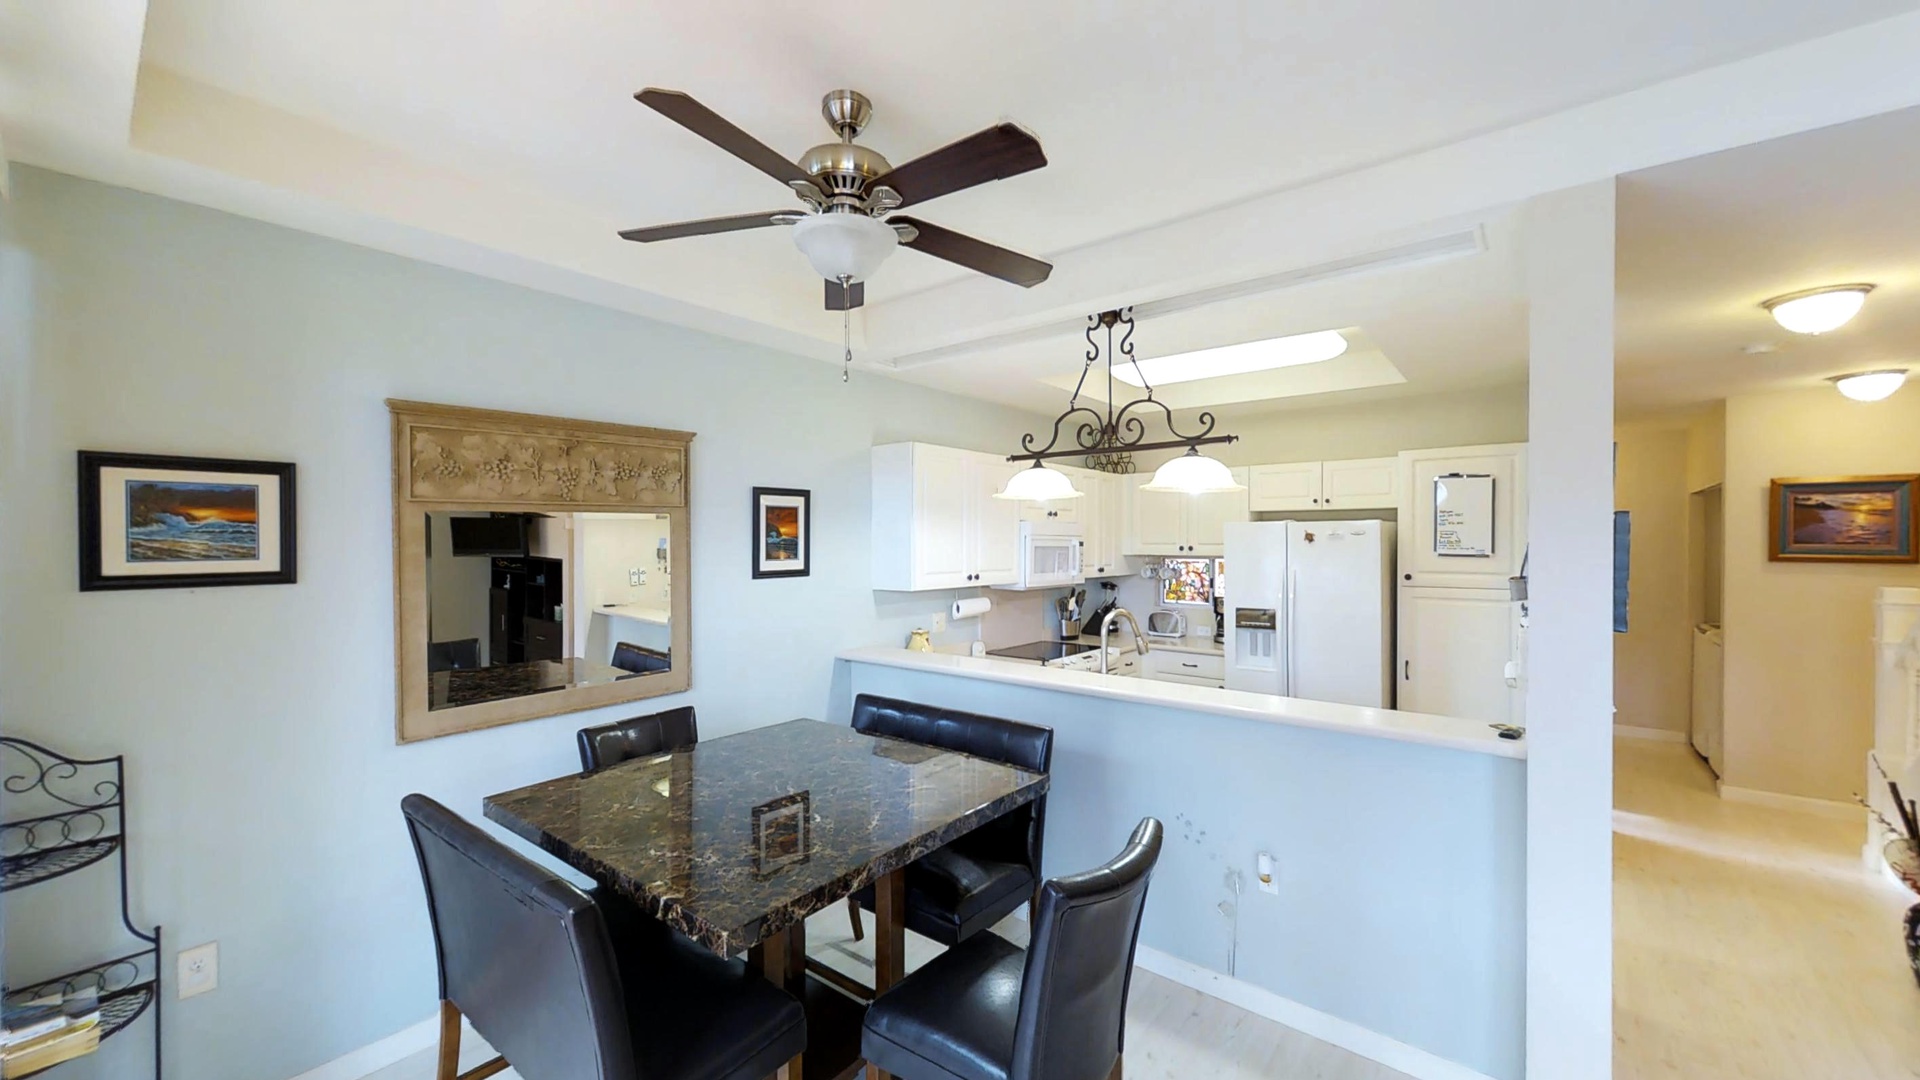 Kapolei Vacation Rentals, Fairways at Ko Olina 8G - A classic bistro table that seats four with a bright open kitchen for hosting.